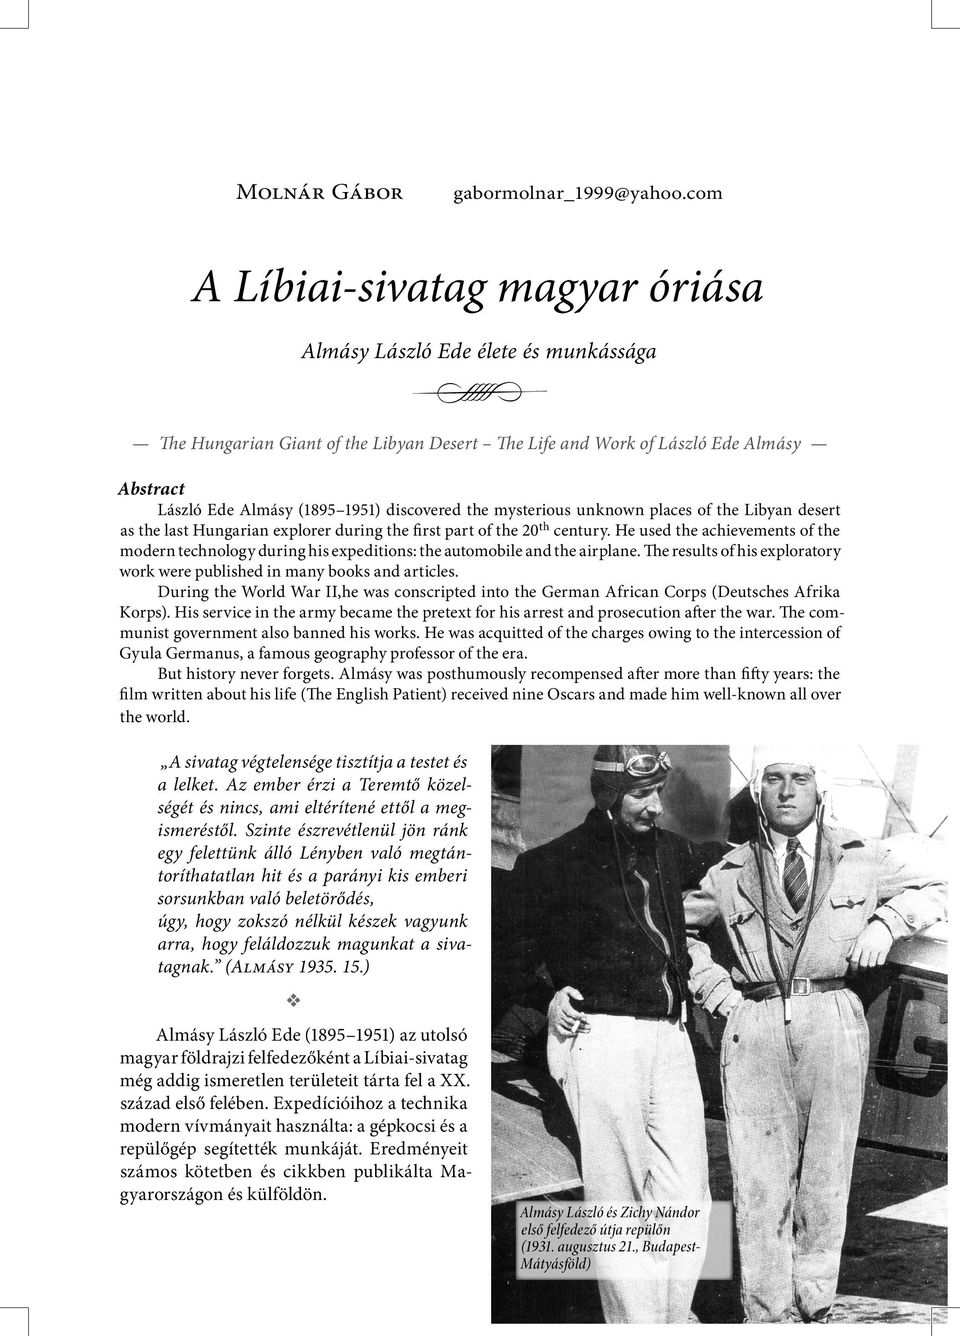 discovered the mysterious unknown places of the Libyan desert as the last Hungarian explorer during the first part of the 20th century.